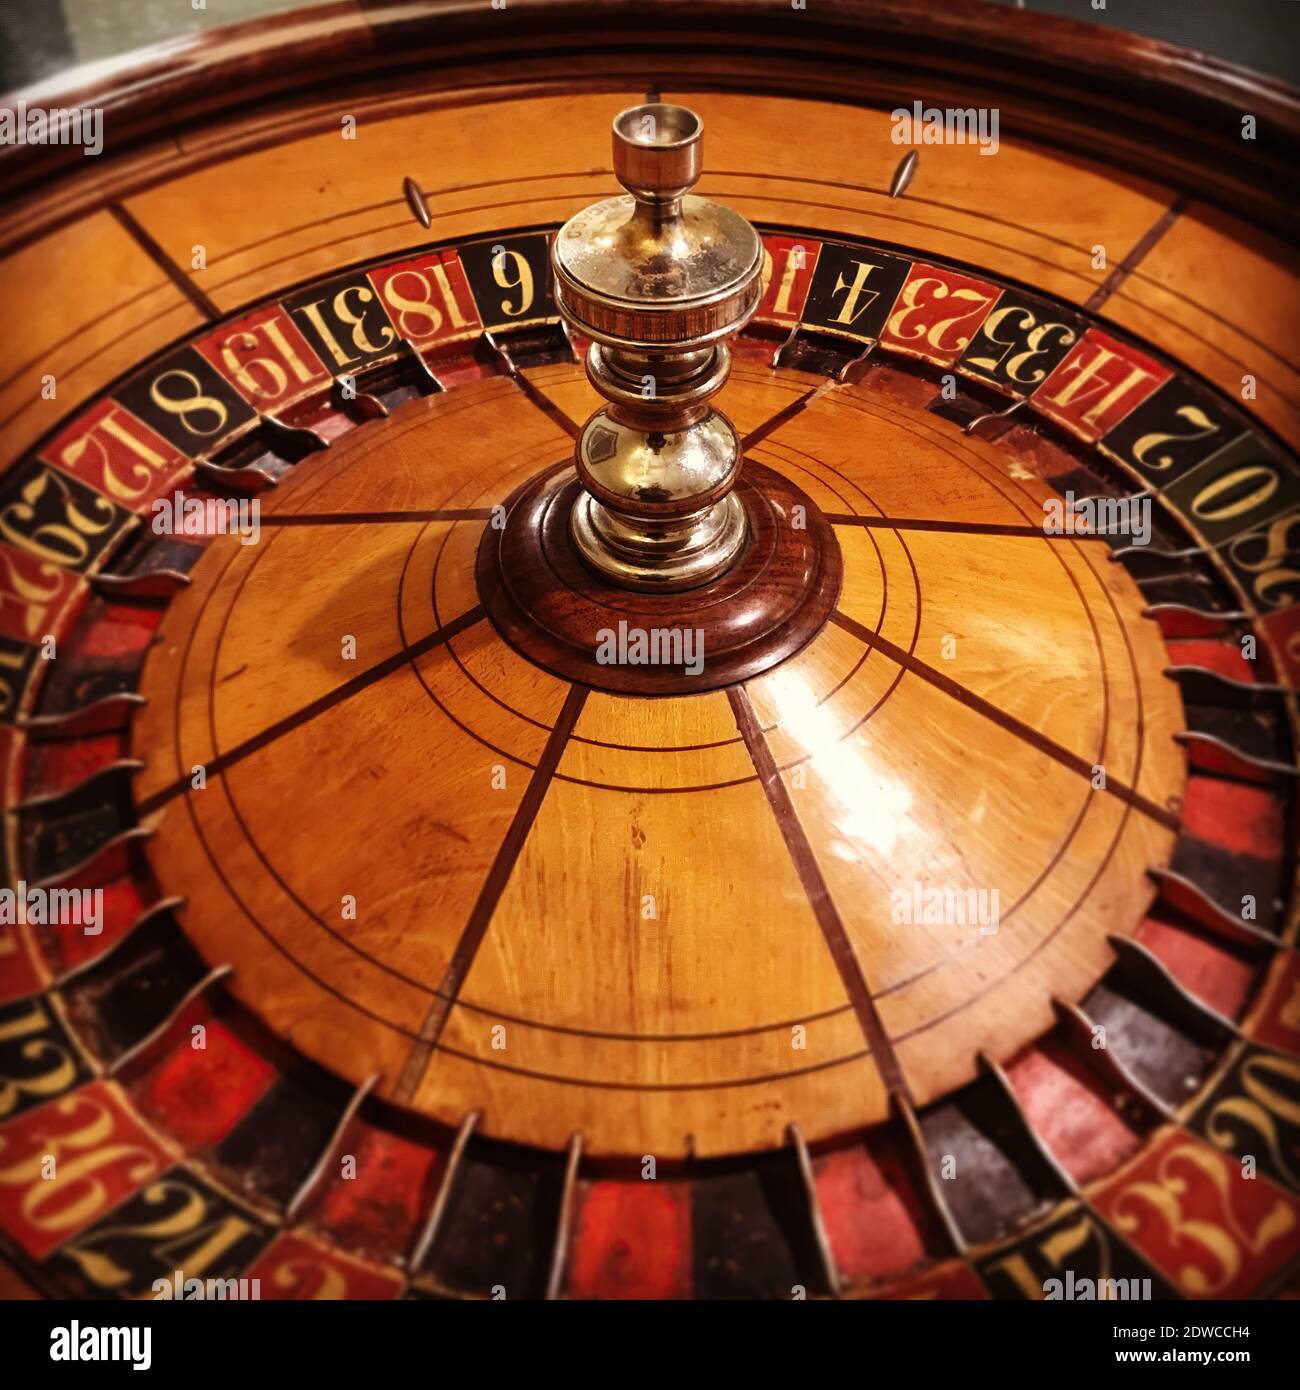 A photo of a vintage wooden roulette wheel. Stock Photo